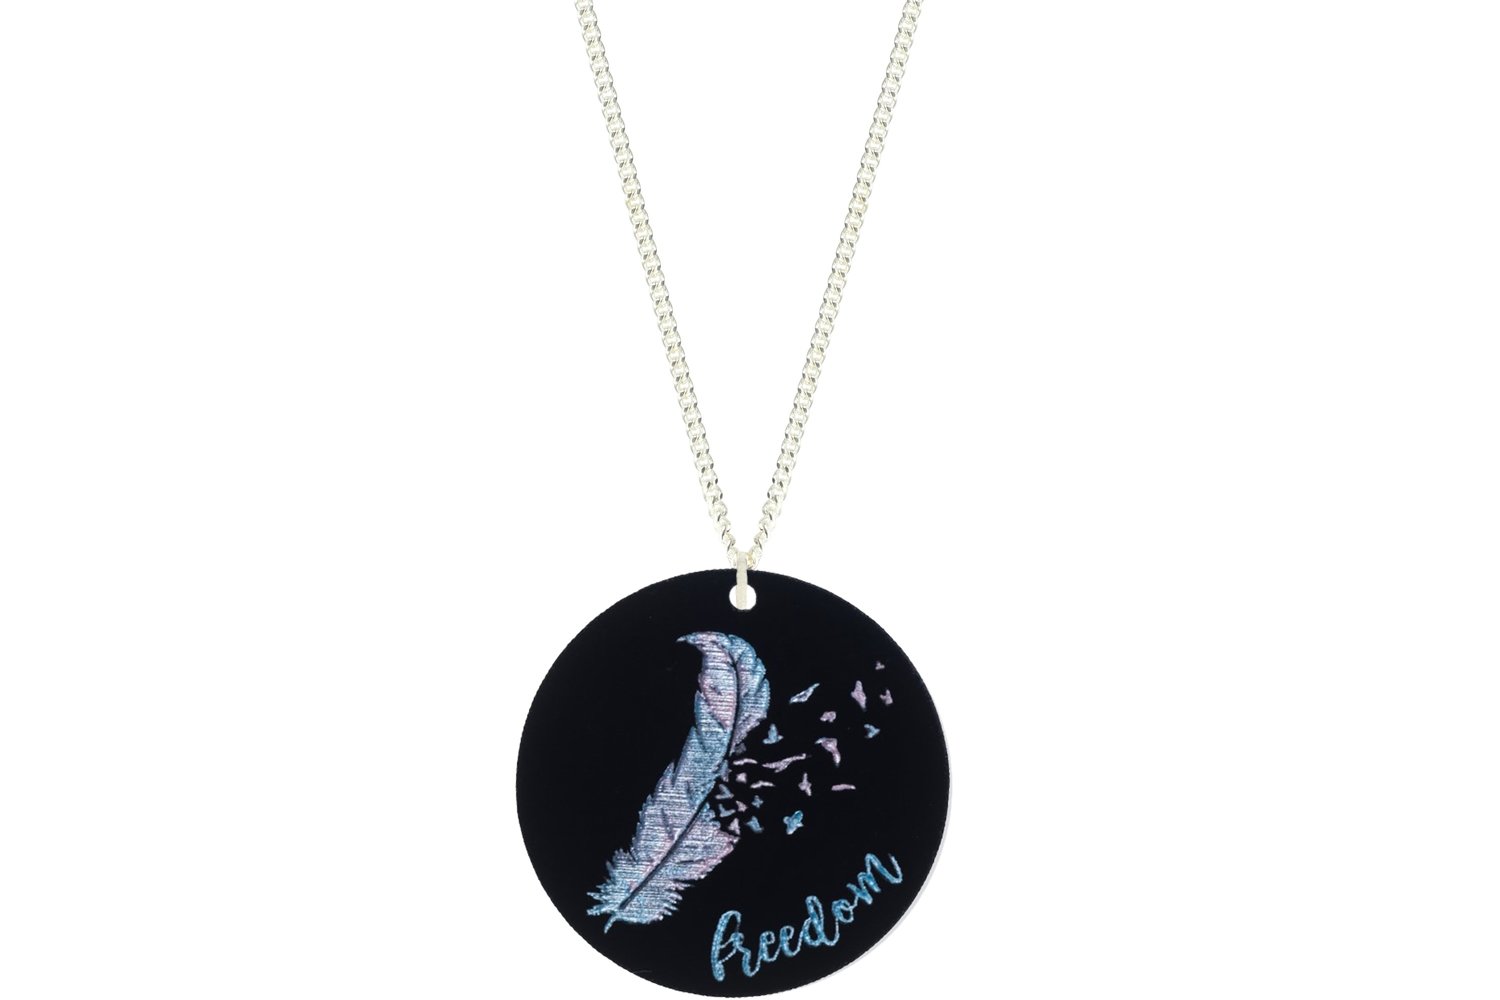 Feather Bird Freedom Pendant Hand Painted Style on Chain Necklace